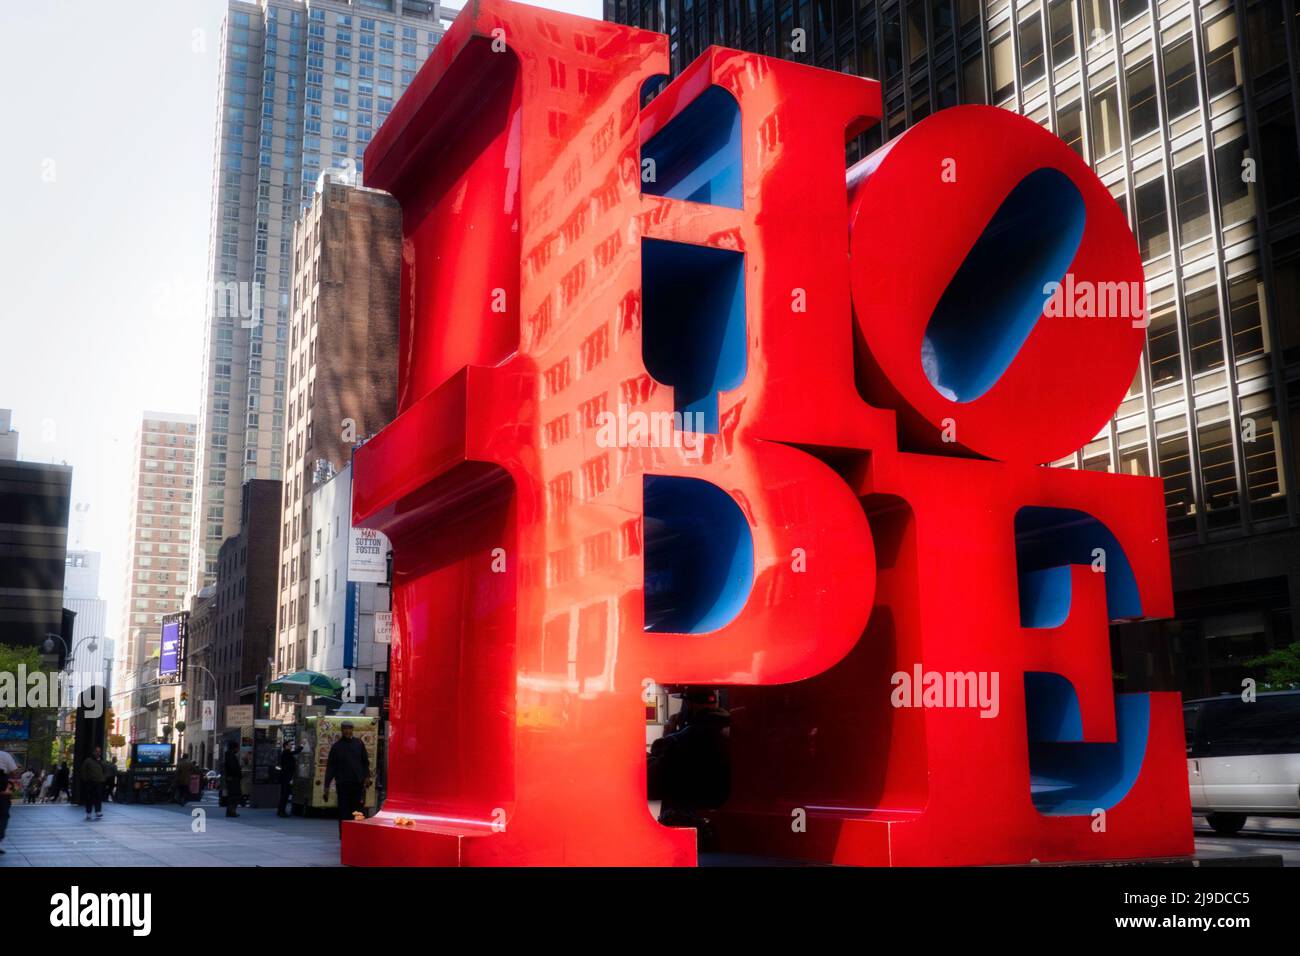 The HOPE sculpture by Robert Indiana is on display near times square, New York City, USA  2022 Stock Photo